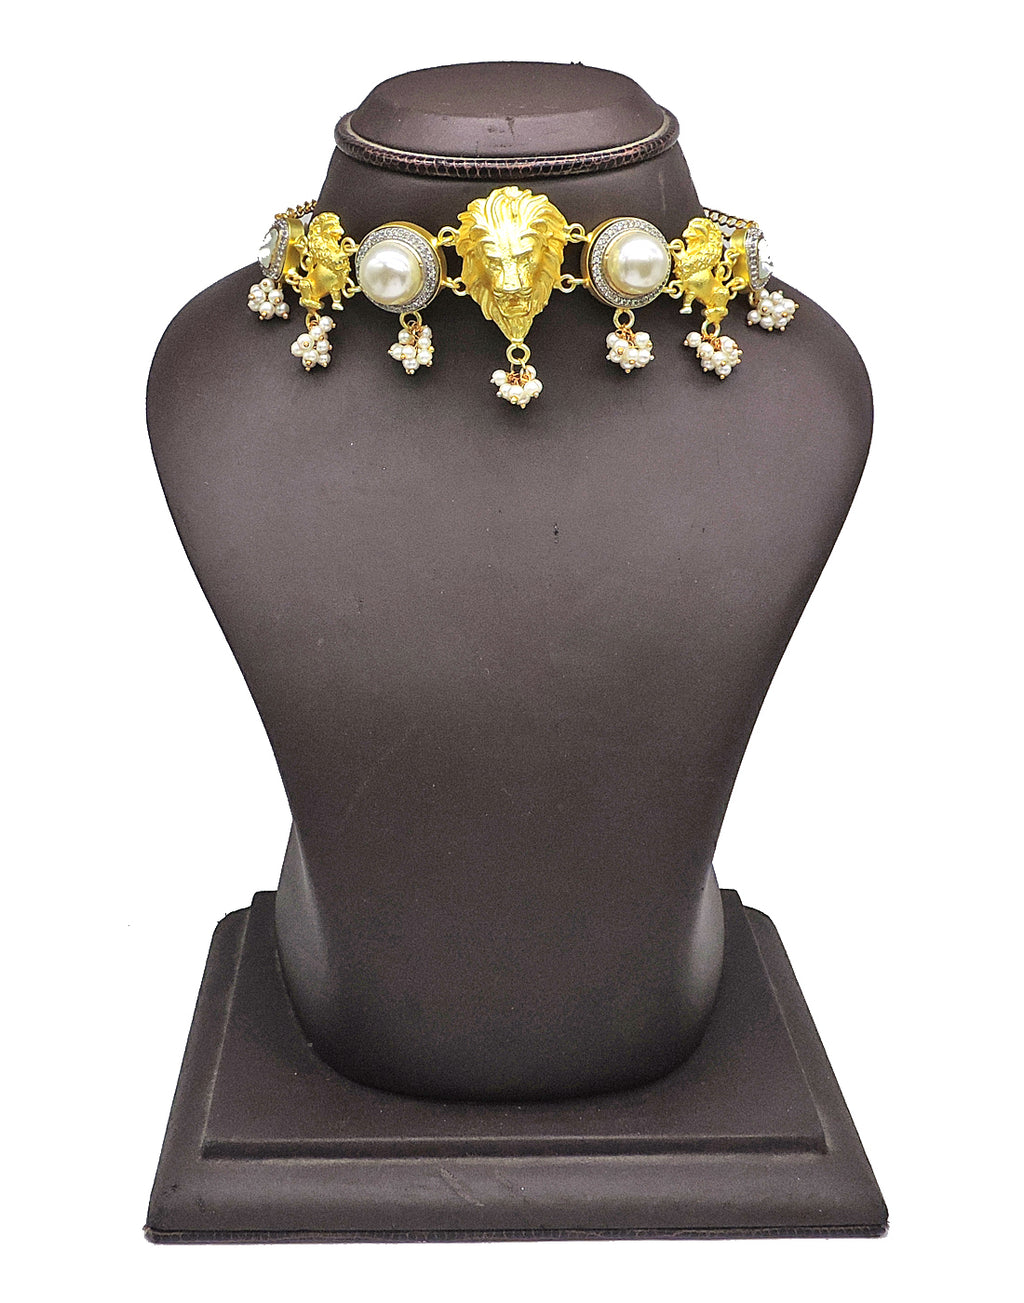 Pearl Lion Necklace - Statement Necklaces - Gold-Plated & Hypoallergenic Jewellery - Made in India - Dubai Jewellery - Dori